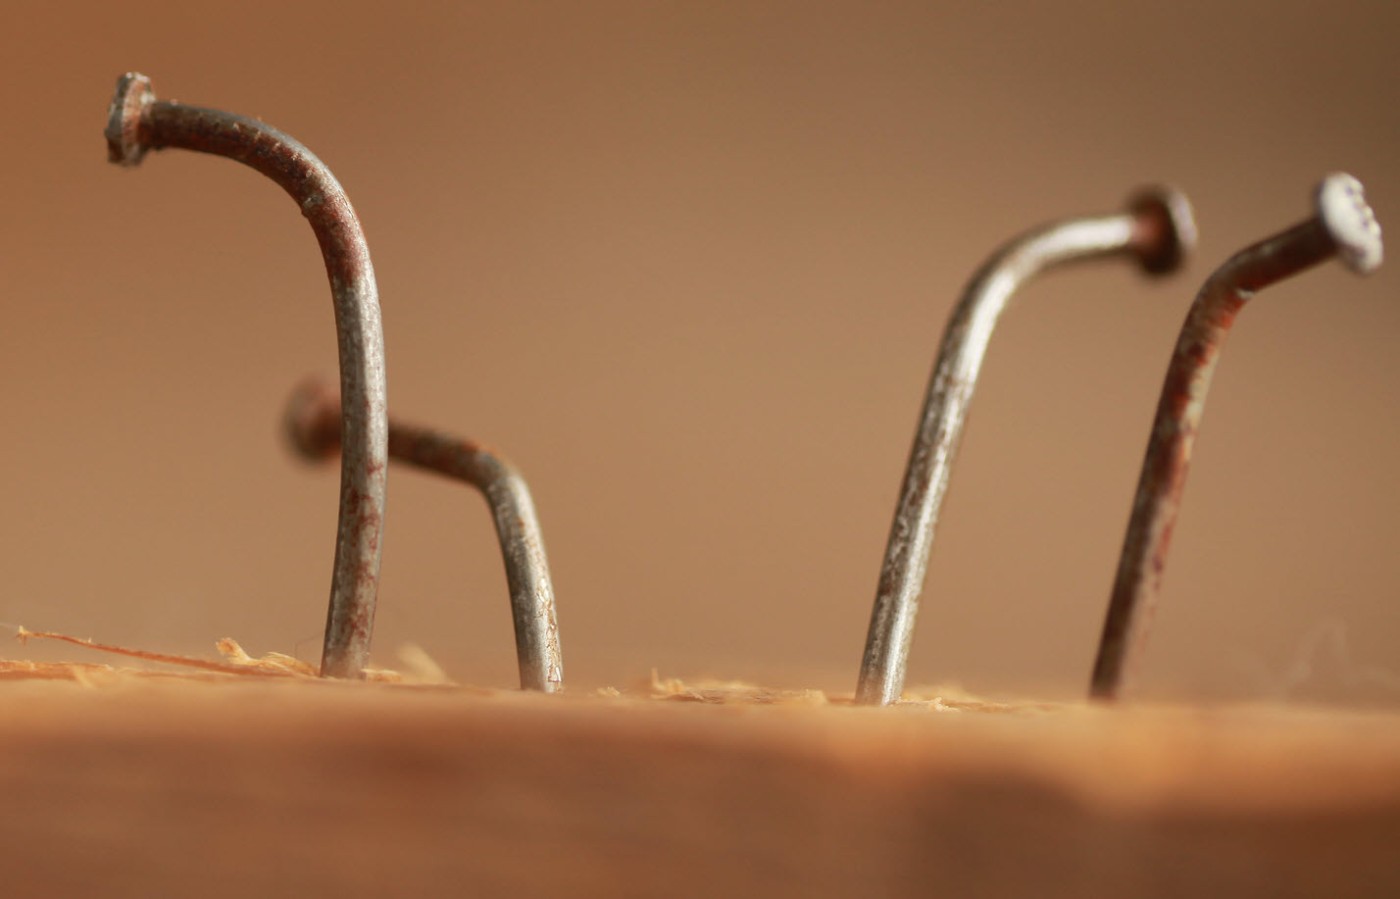 https://tickertapecdn.tdameritrade.com/assets/images/pages/md/Four bent nails: avoiding trading mistakes